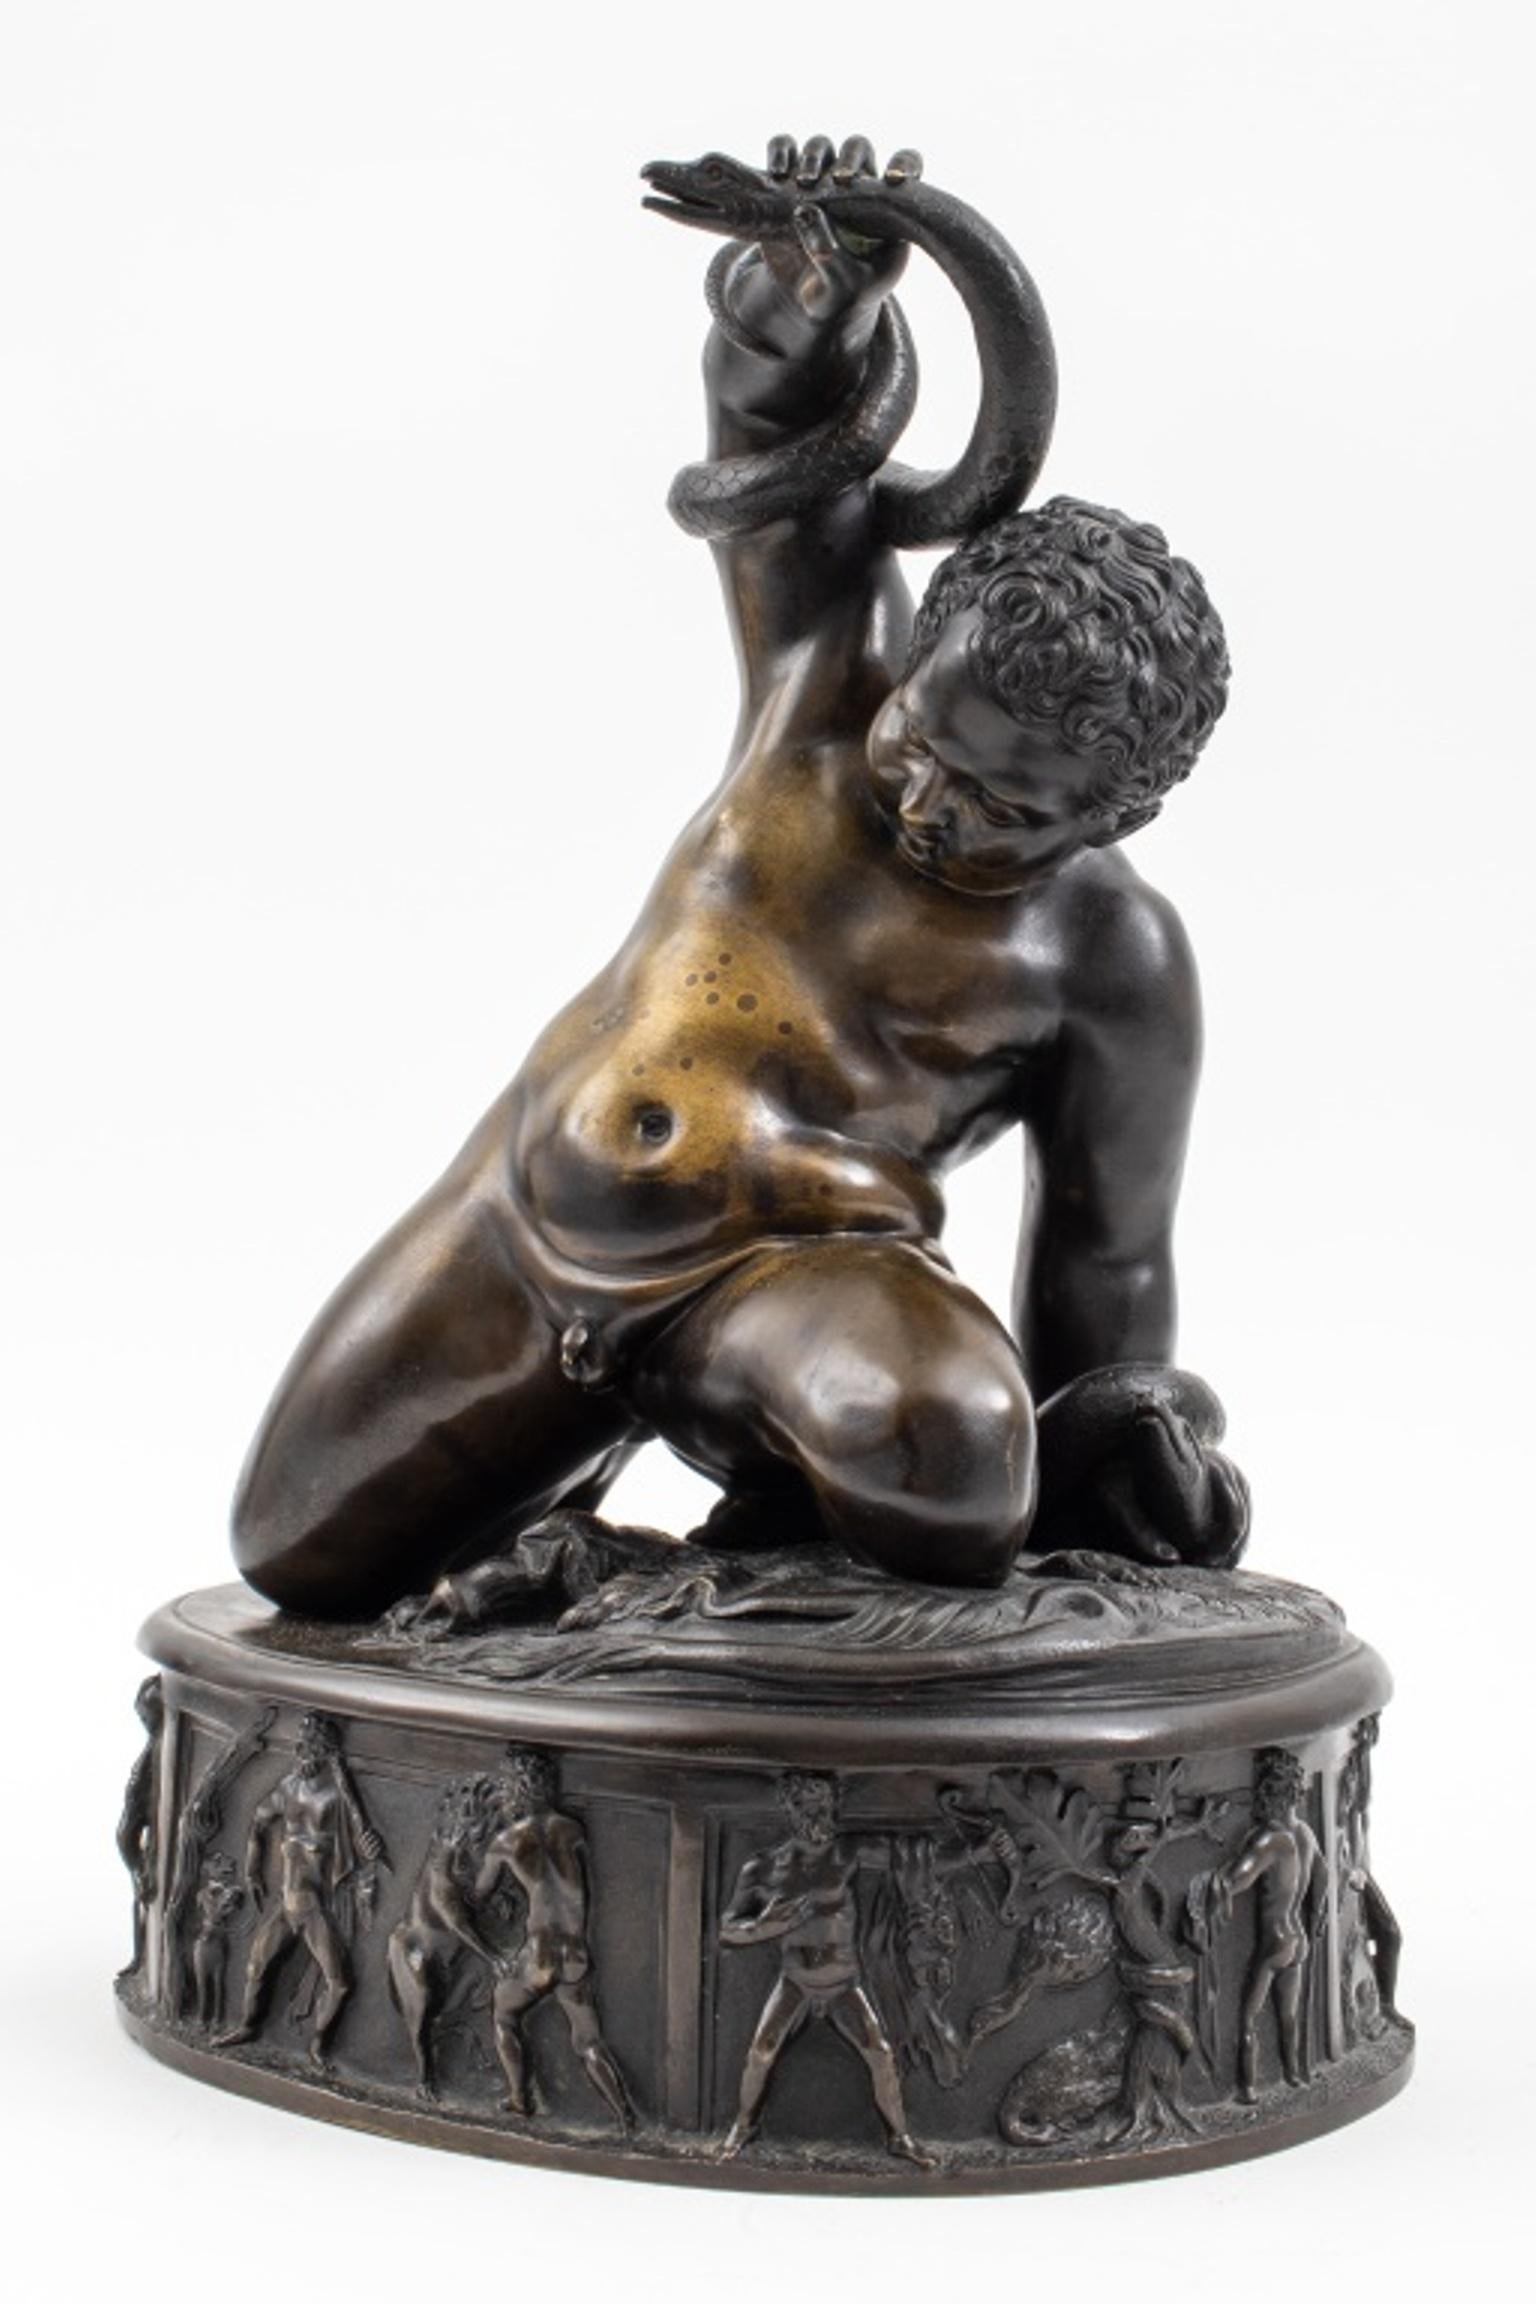 Hercules fighting a serpent atop the Nemean lion skin, mounted on a pedestal with frieze scenes of Hercules's labors, early to mid nineteenth century. In very good vintage condition.

Dealer: S138XX